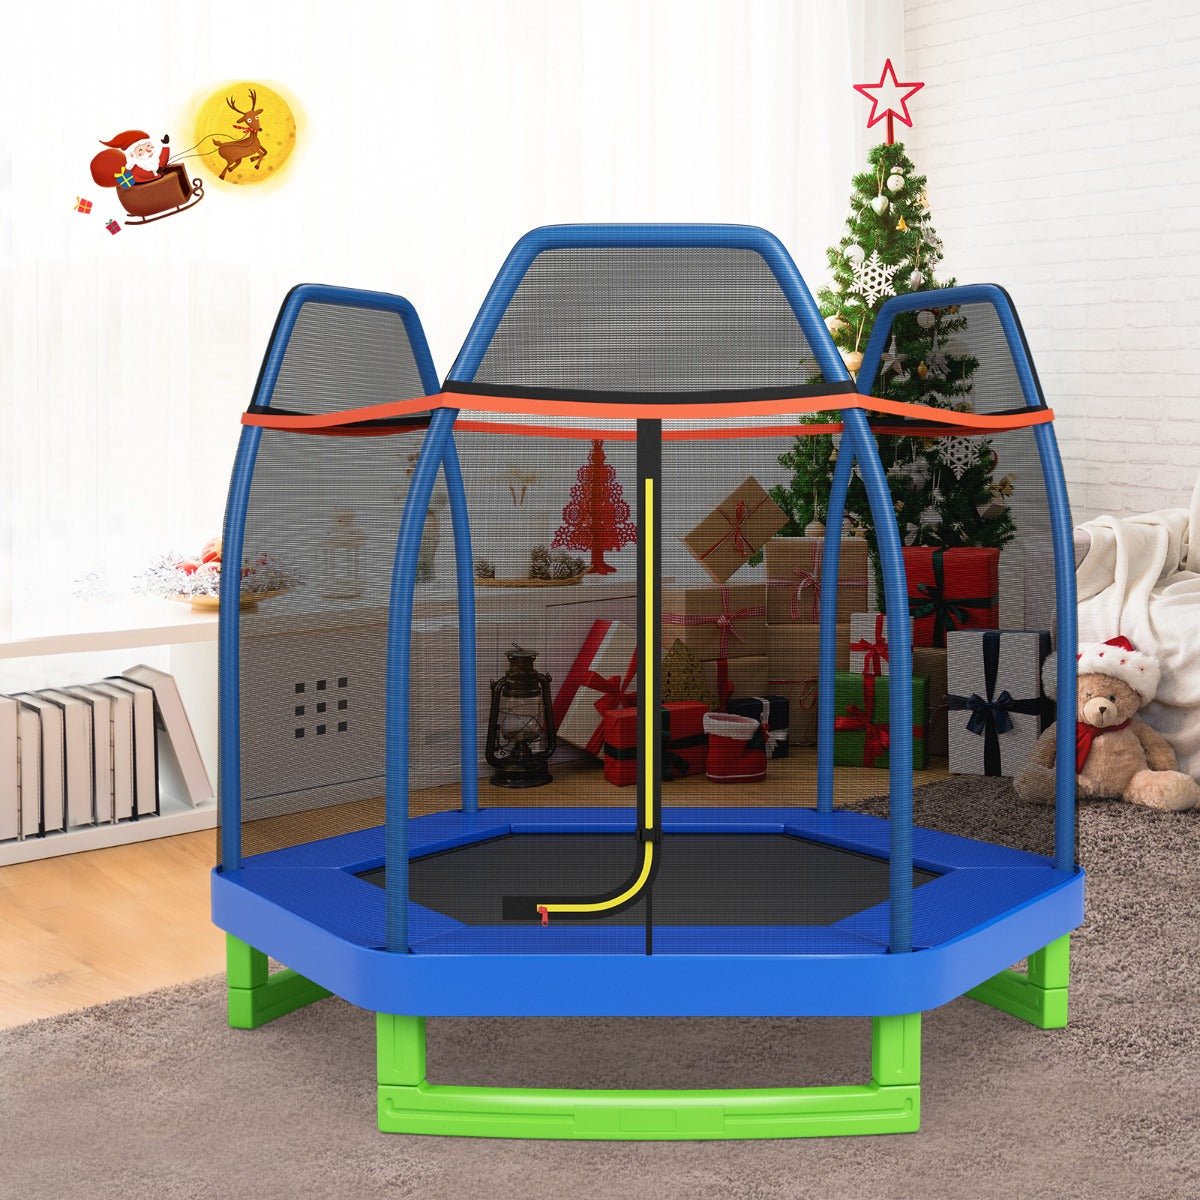 Secure Fun: Kids Trampoline with Safety Enclosure Net for Outdoor Play Blue